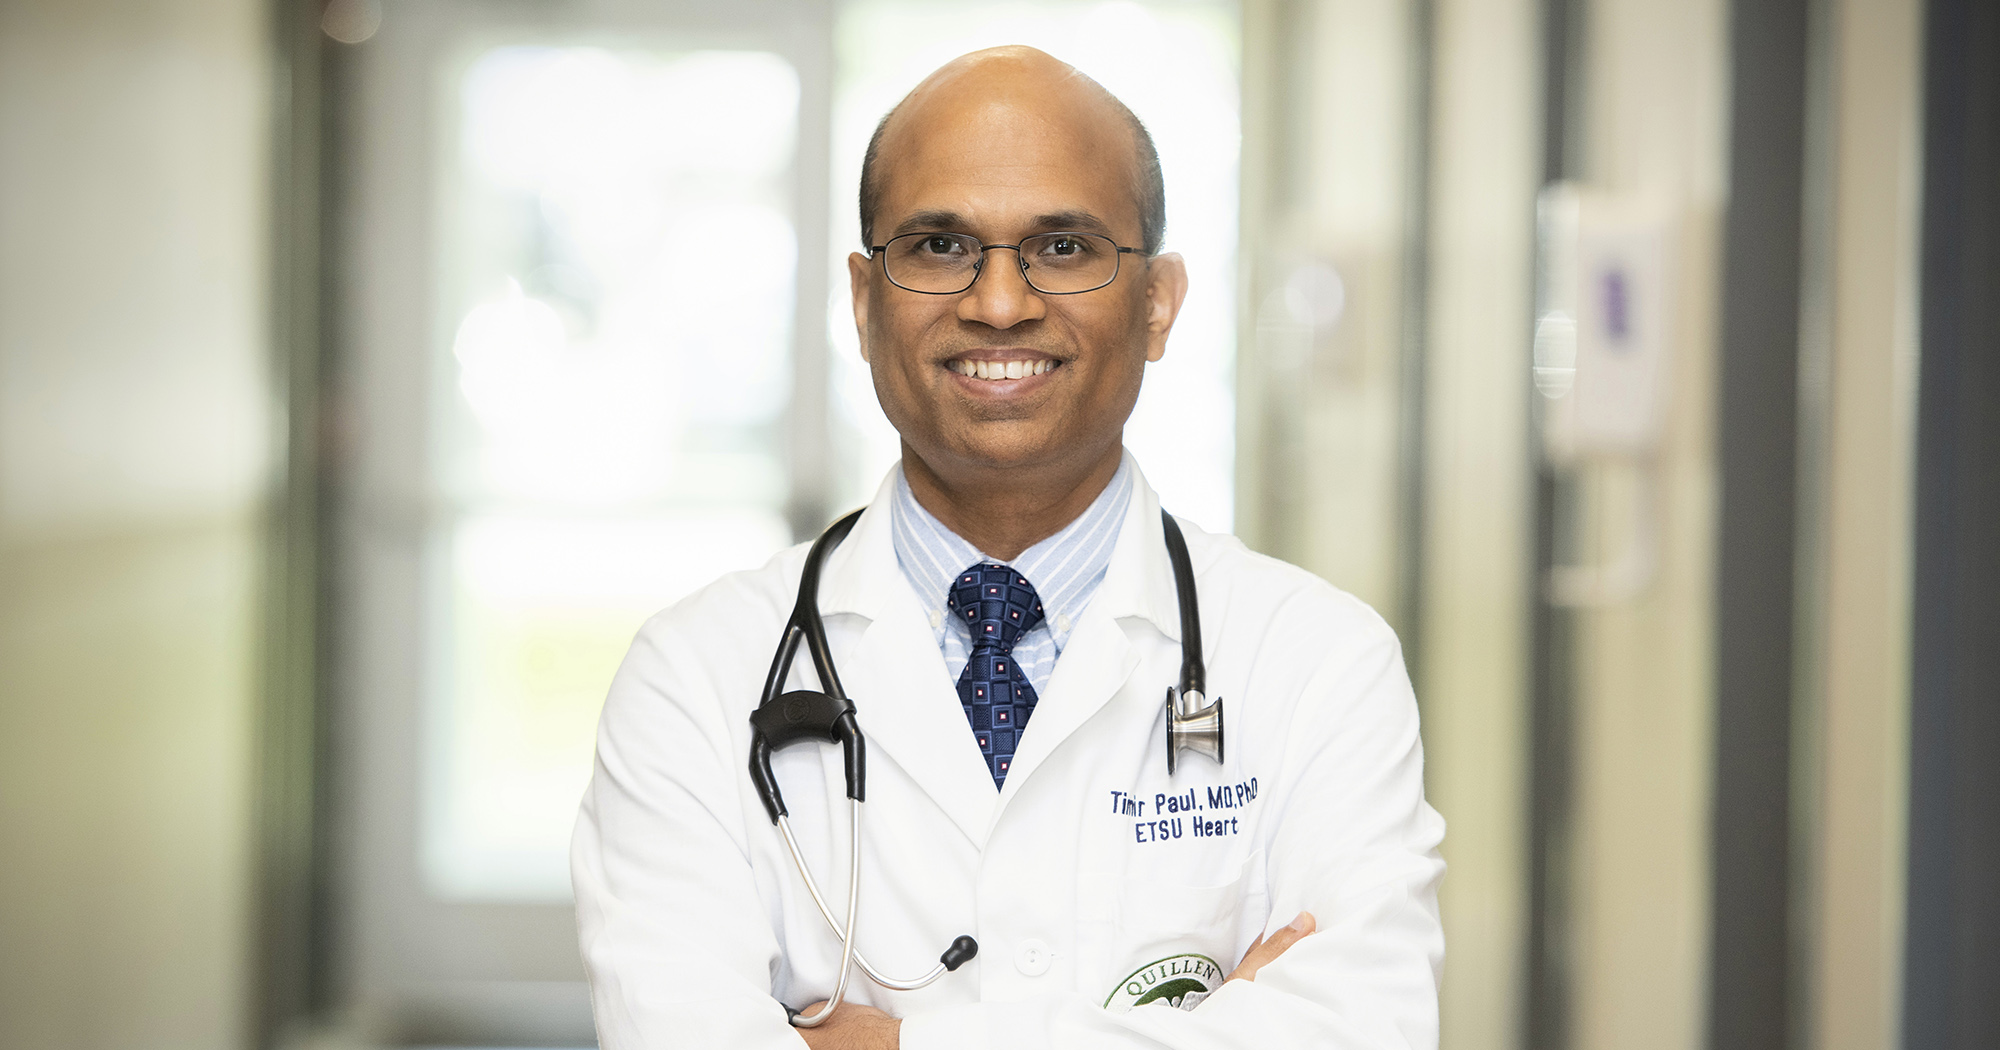 image for Dr. Timir Paul